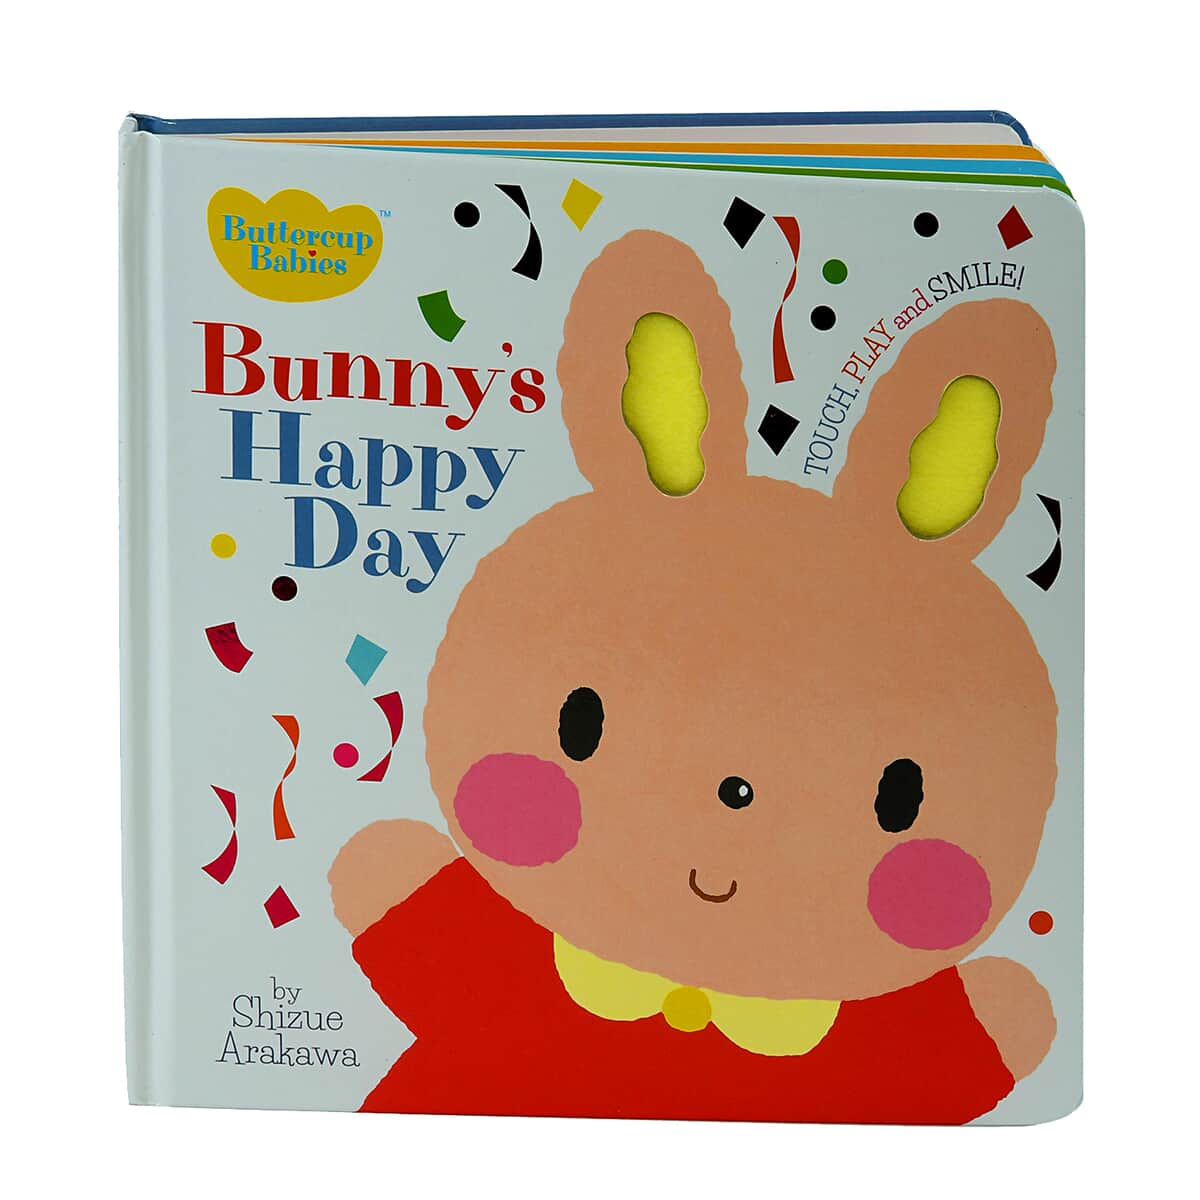 Buttercup Babies Bunny's Happy Day Children's Book image number 0